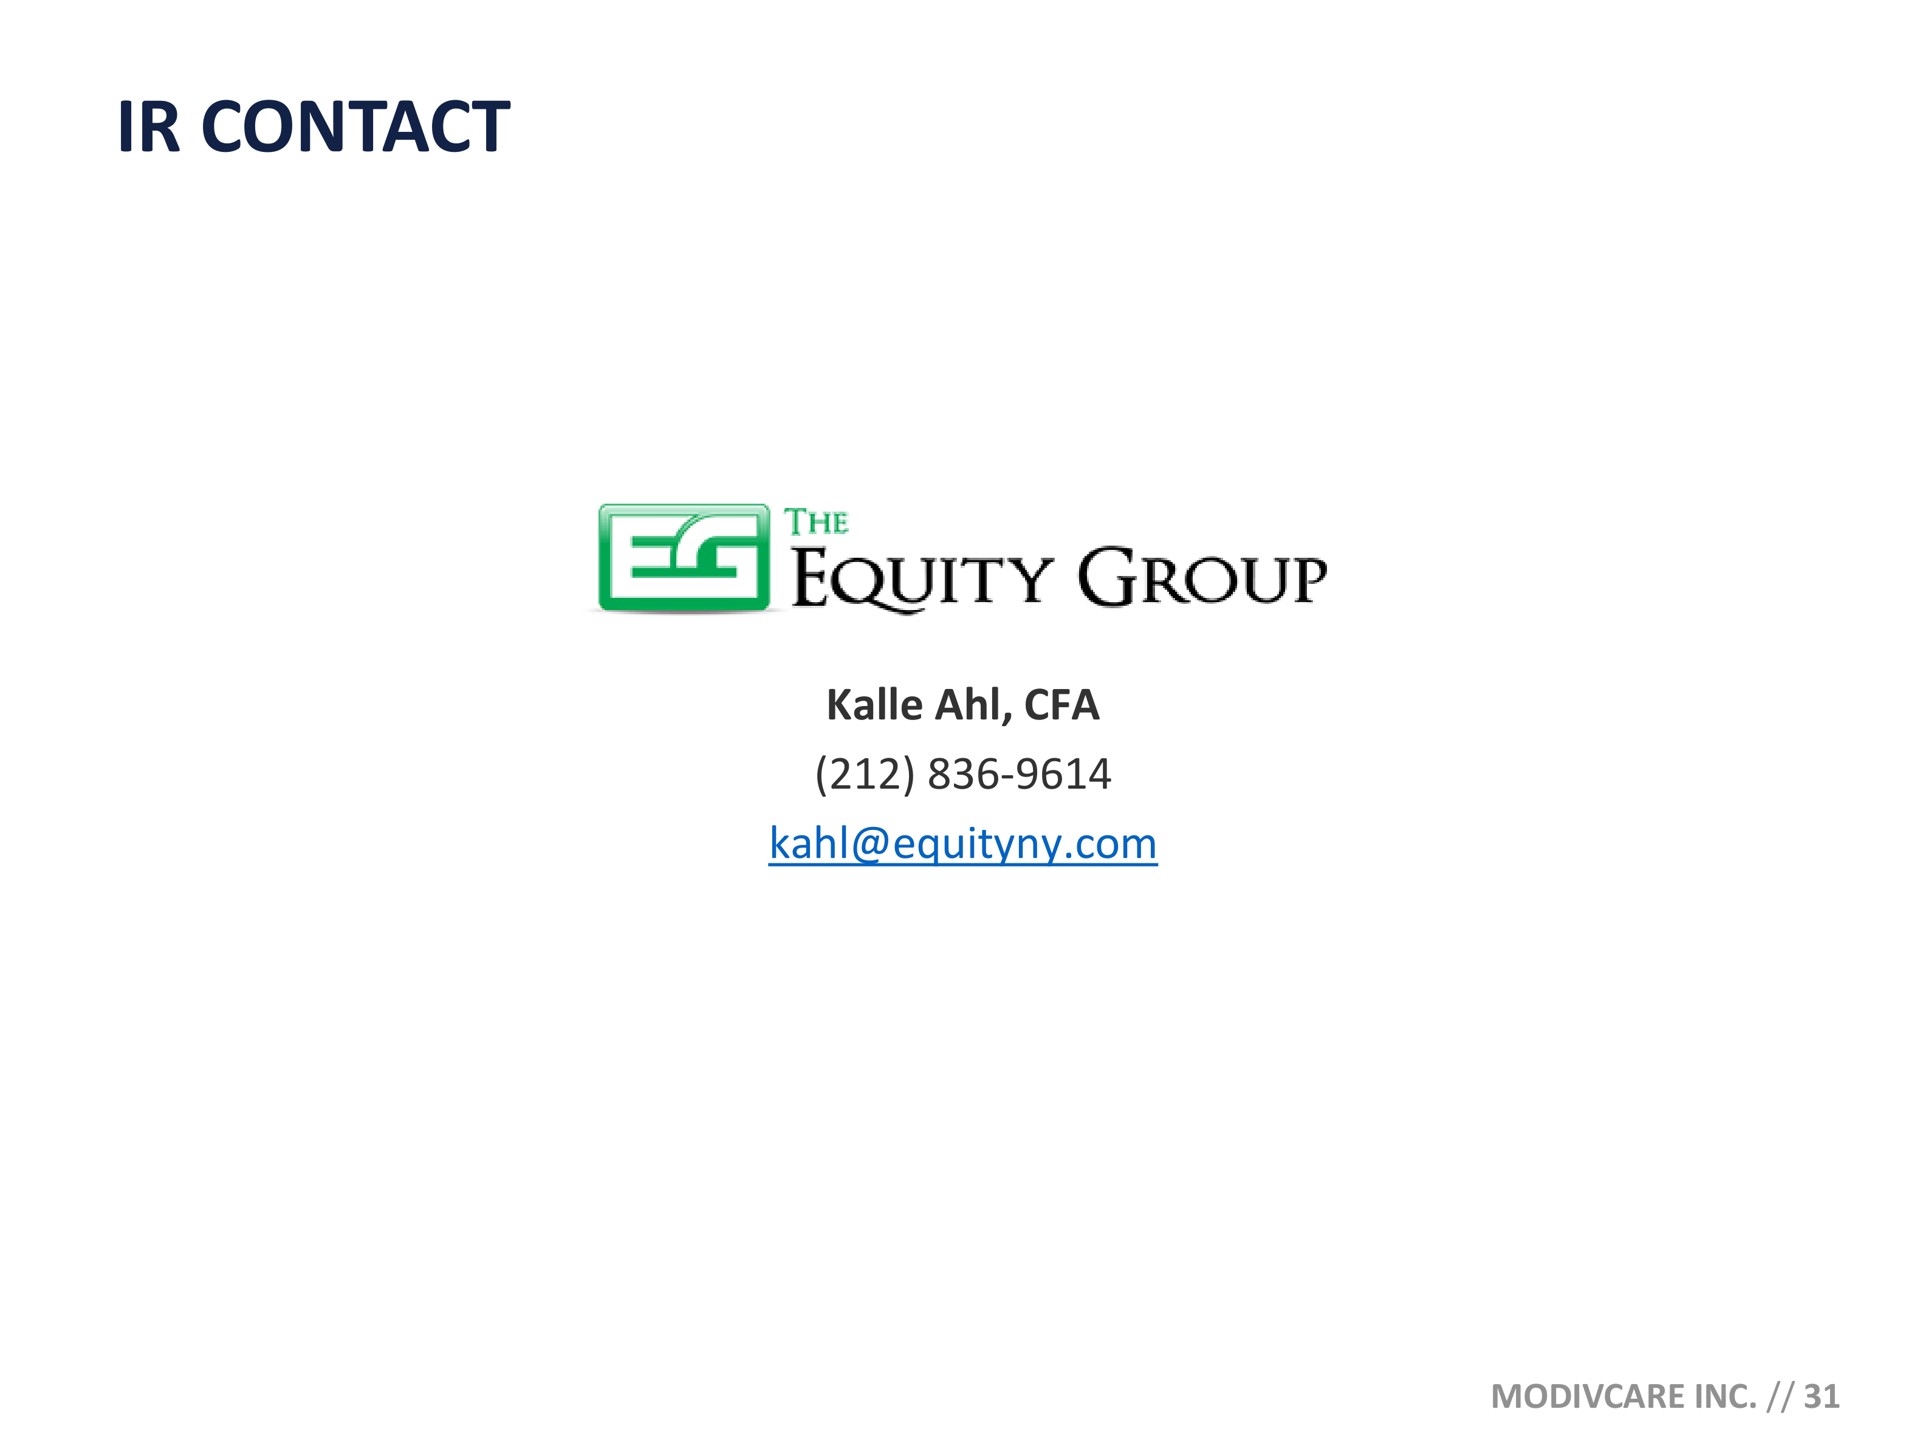 contact equity group | ModivCare